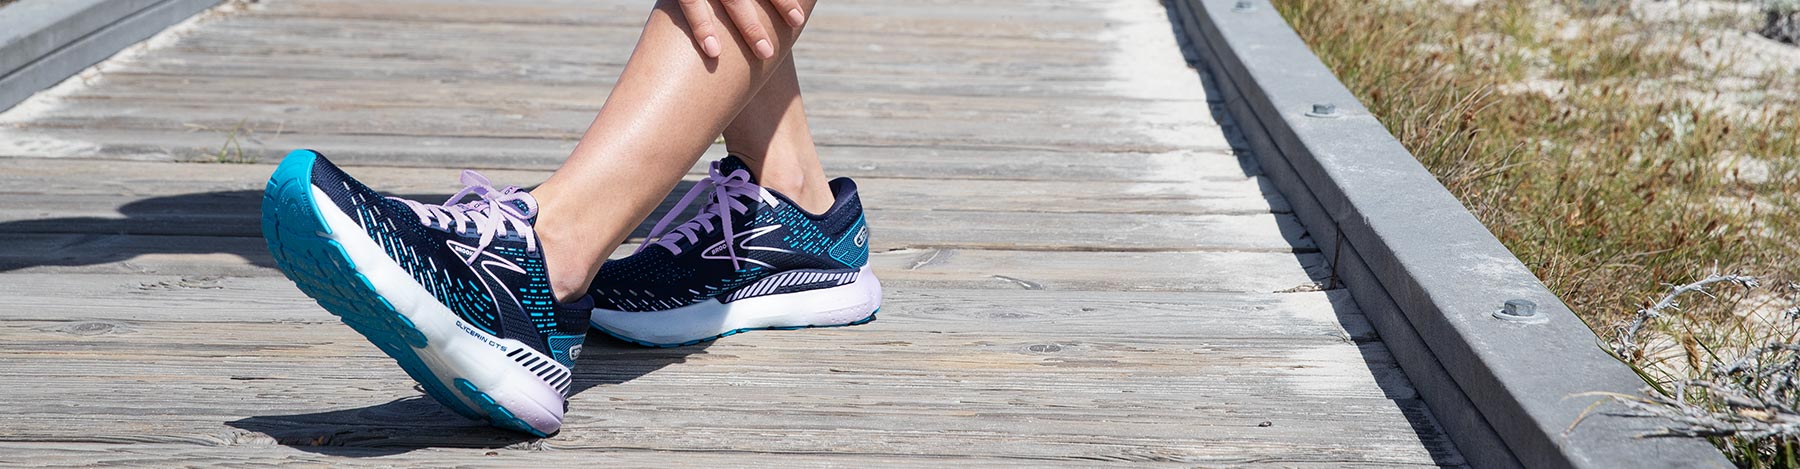 A person stretching their legs on a boardwalk in Brooks Glycerin GTS 20 running shoes.